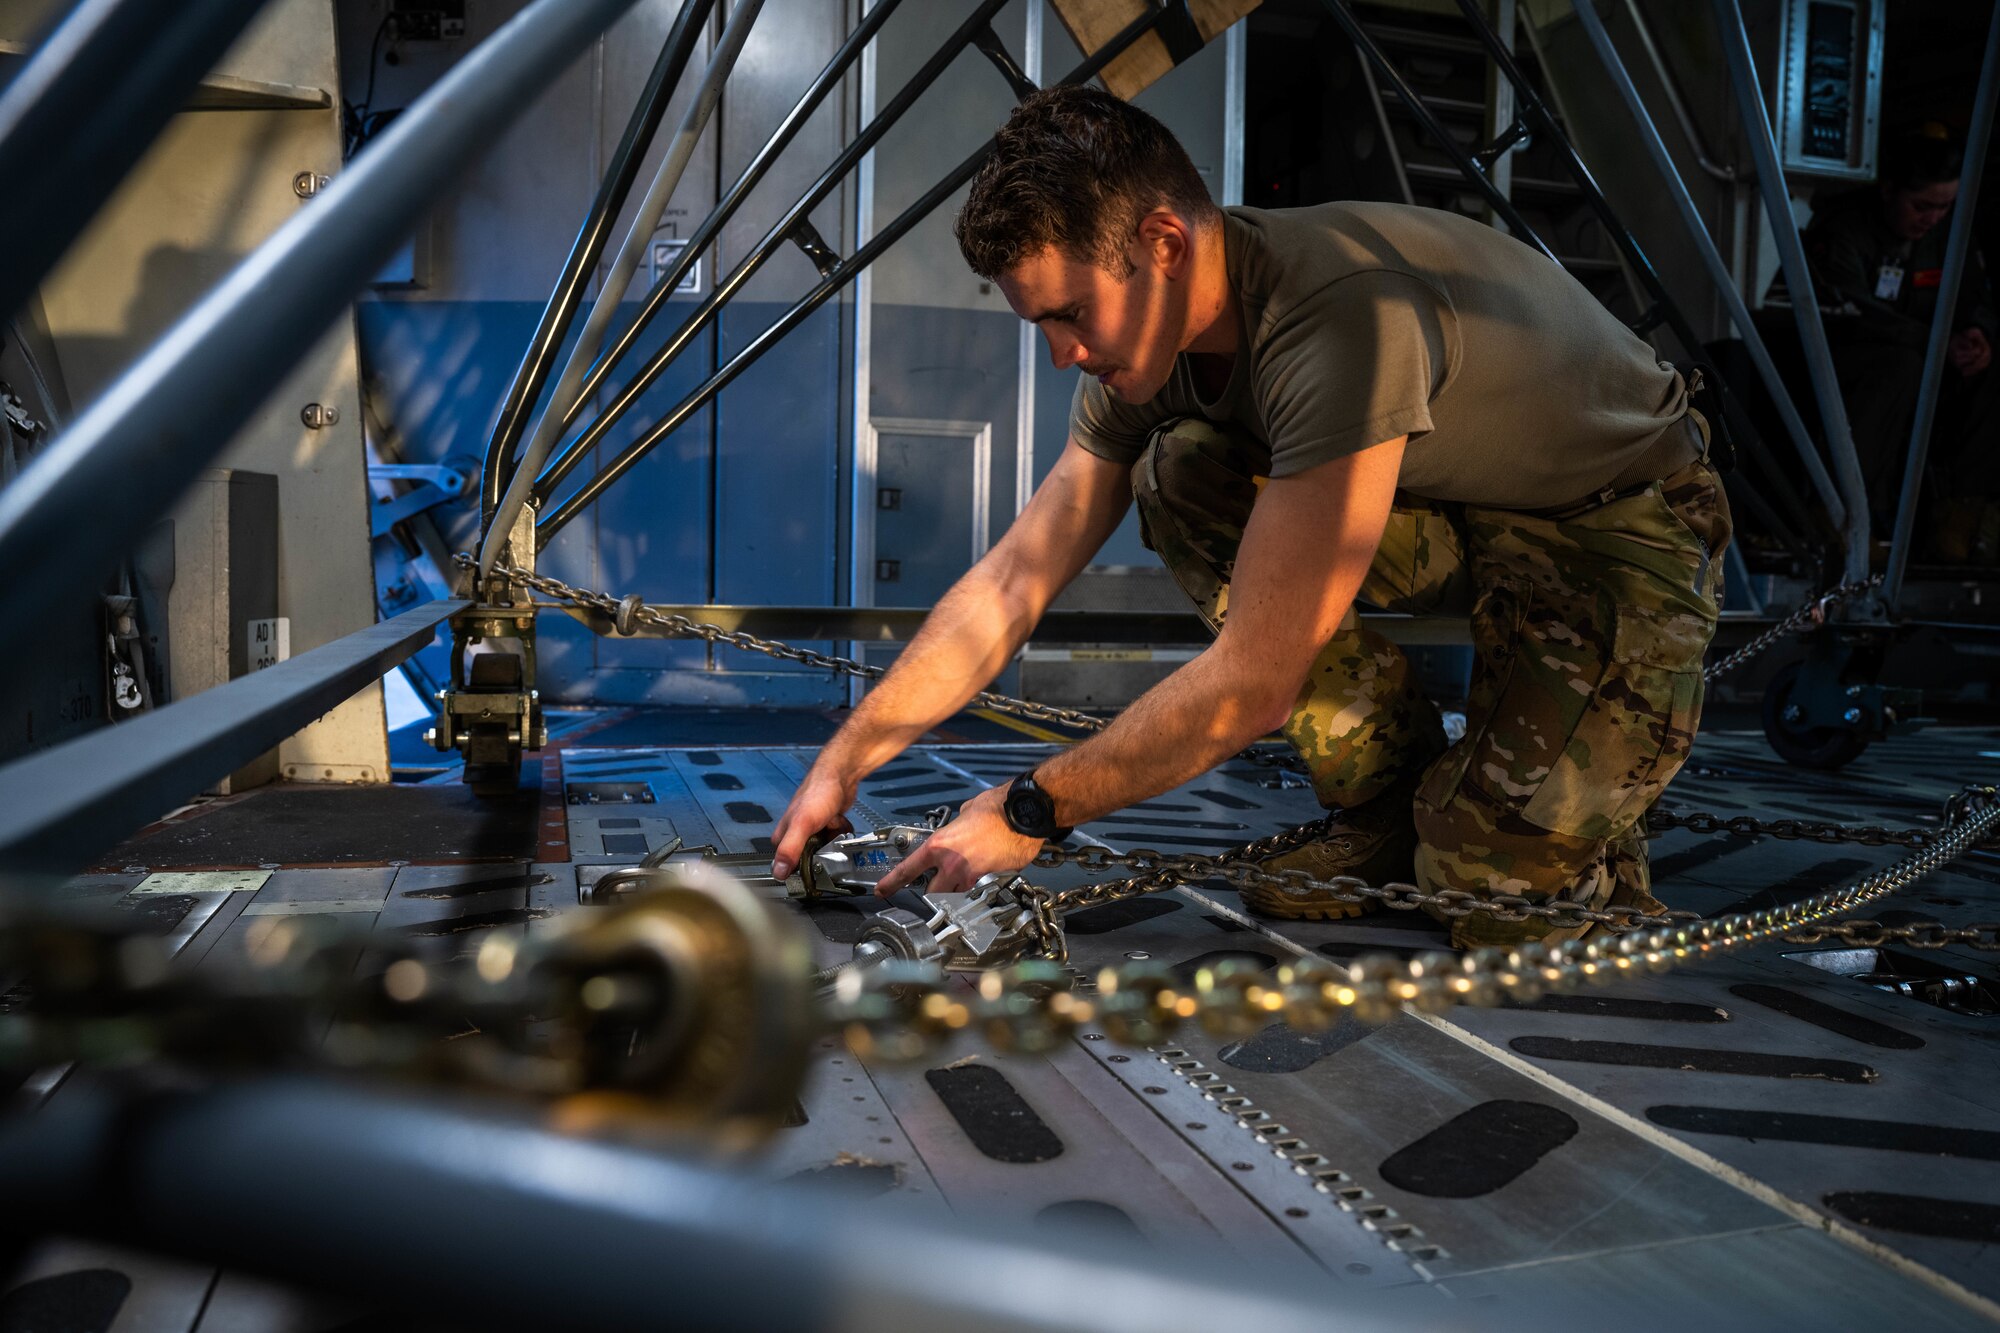 Airman 1st Class Jace Grayson, 535th Airlift Squadron loadmaster, secures cargo on a C-17 Globemaster III  at Joint Base Pearl Harbor-Hickam, Hawaii, during the Joint Base Readiness Exercise, March 1, 2023. The 15th Wing trains to operate, fight and advance its capabilities through realistic training exercises designed to test and develop joint logistics, resilience and rapid strategic mobility. (U.S. Air Force photo by Senior Airman Makensie Cooper)